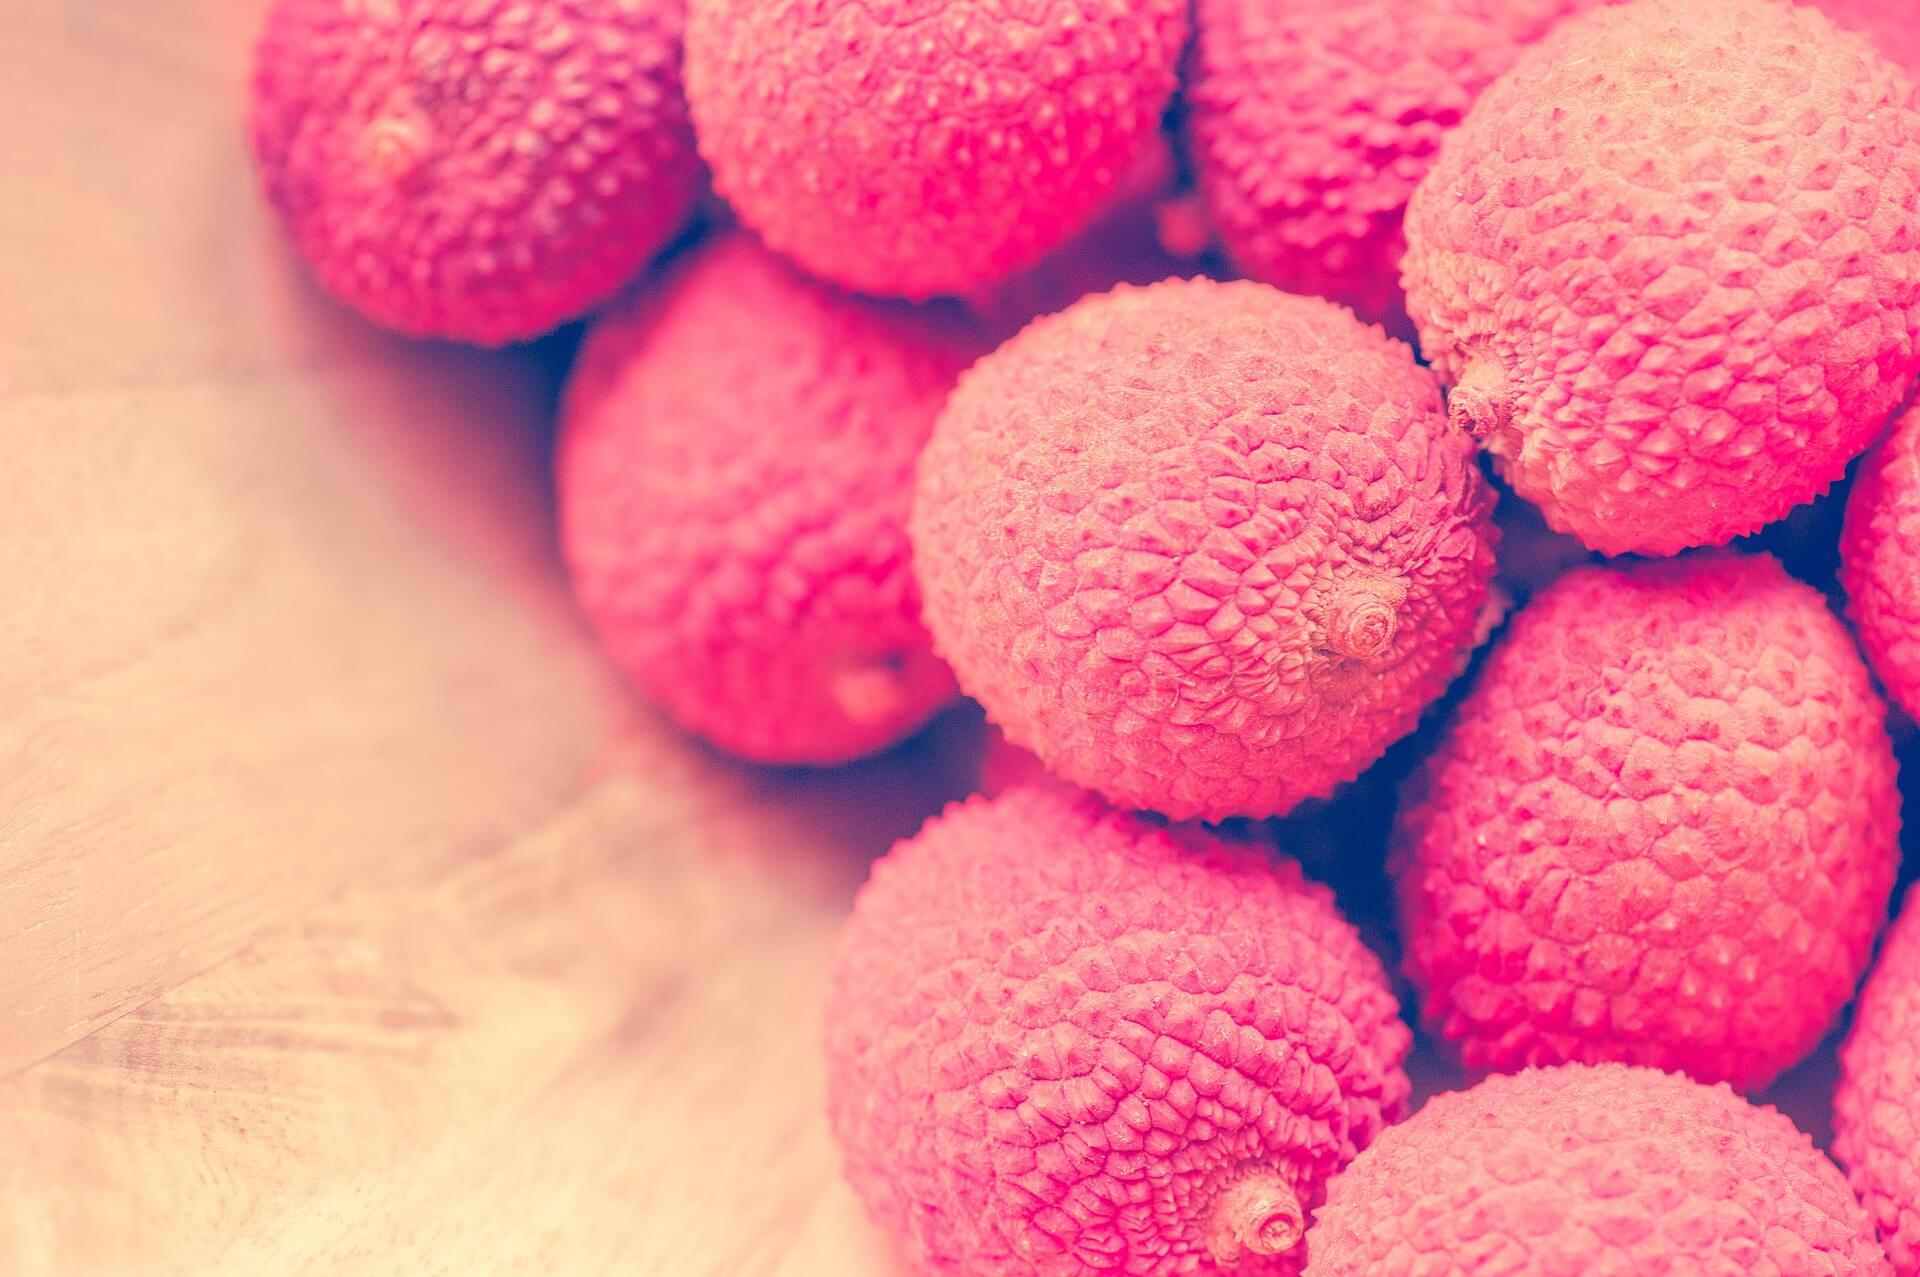 Five Pink Foods That Are Good For You